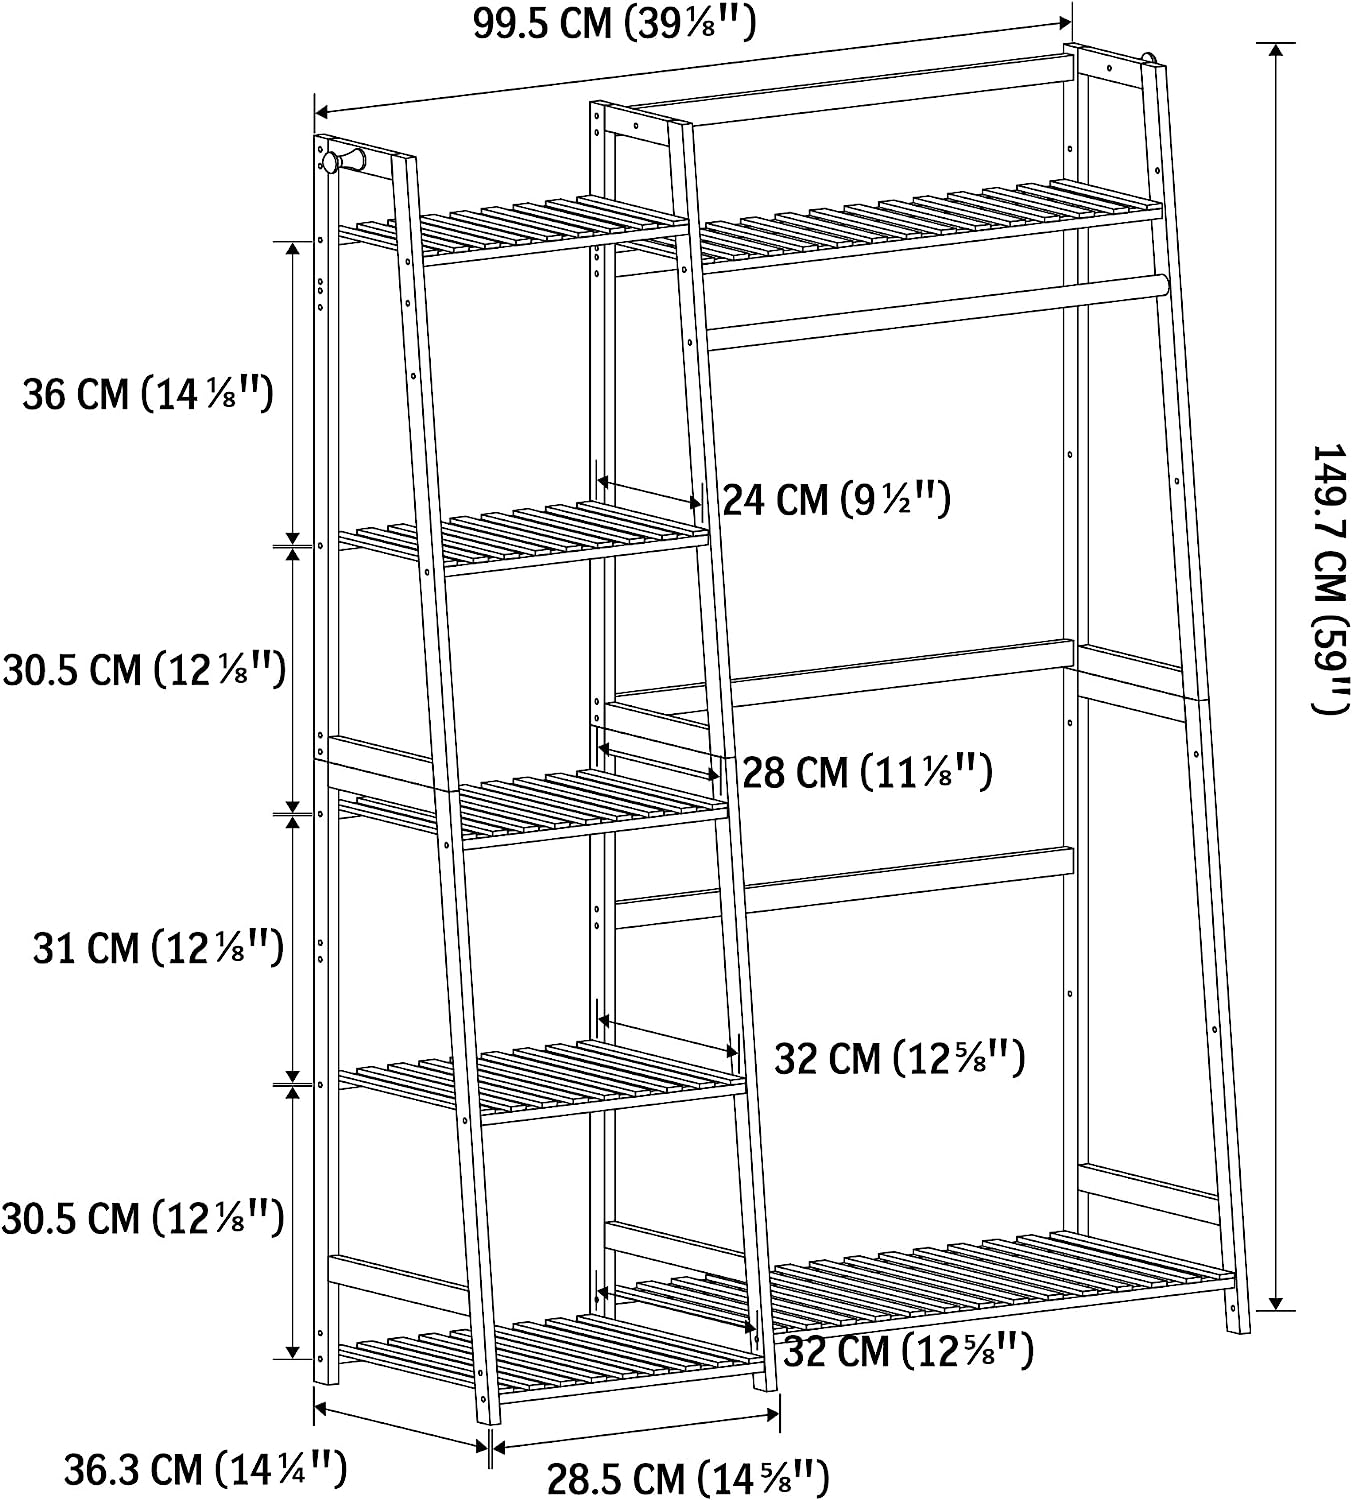 Amboo Garment Rack with Shelves, Clothing Rack for Hanging Clothes, Freestanding Closet Organizer